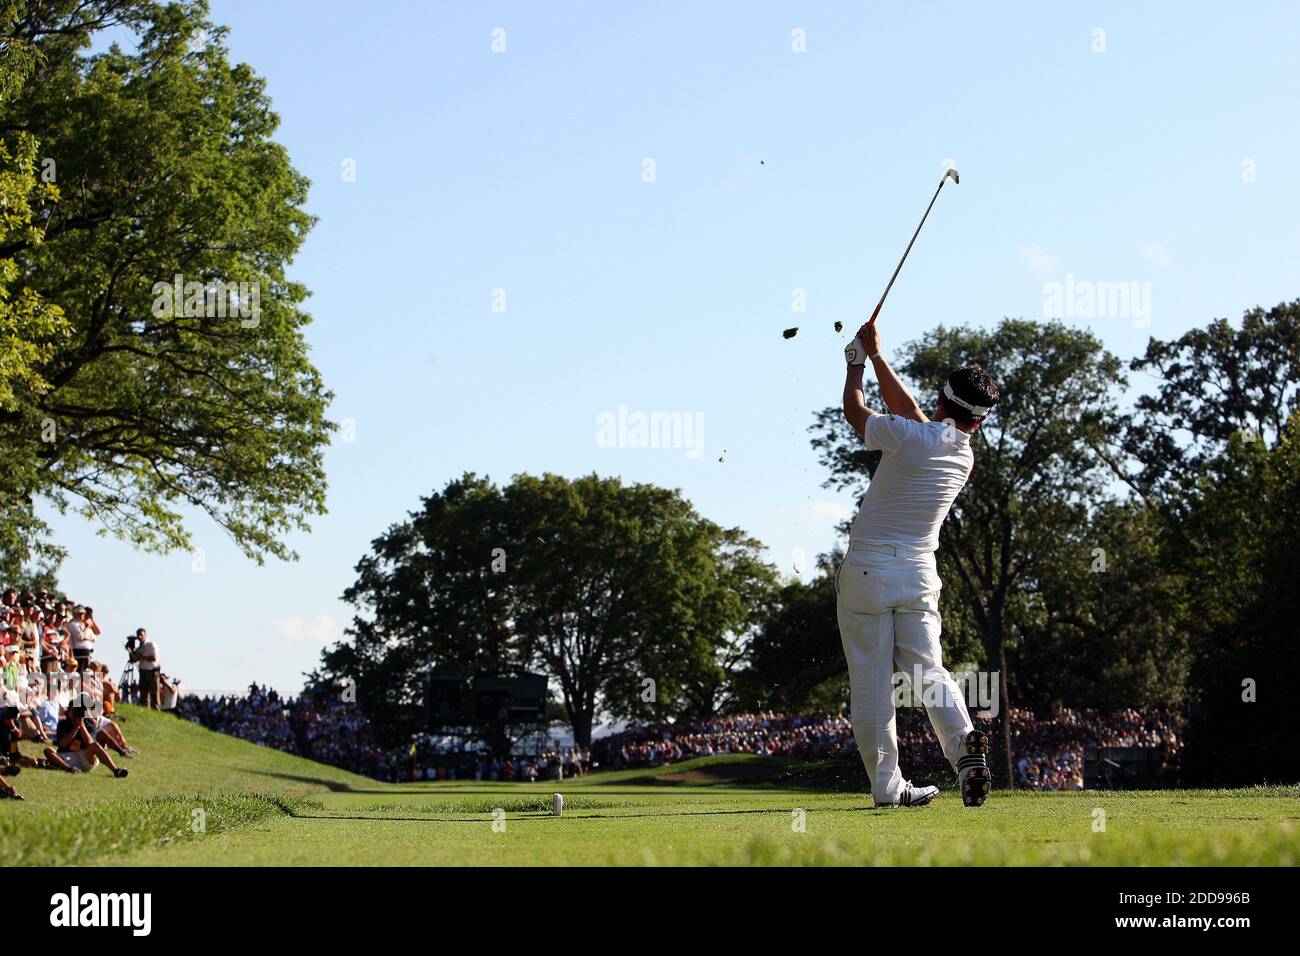 NO FILM, NO VIDEO, NO TV, NO DOCUMENTARY - Y.E. Yang tees off on the 17th hole during the final round of the PGA Championship at Hazeltine National Golf Club in Chaska, MN, USA on August 16, 2009. Yang won the tournament with a score of 280. Photo by Carlos Gonzalez/Minneapolis Star Tribune/MCT/Cameleon/ABACAPRESS.COM Stock Photo